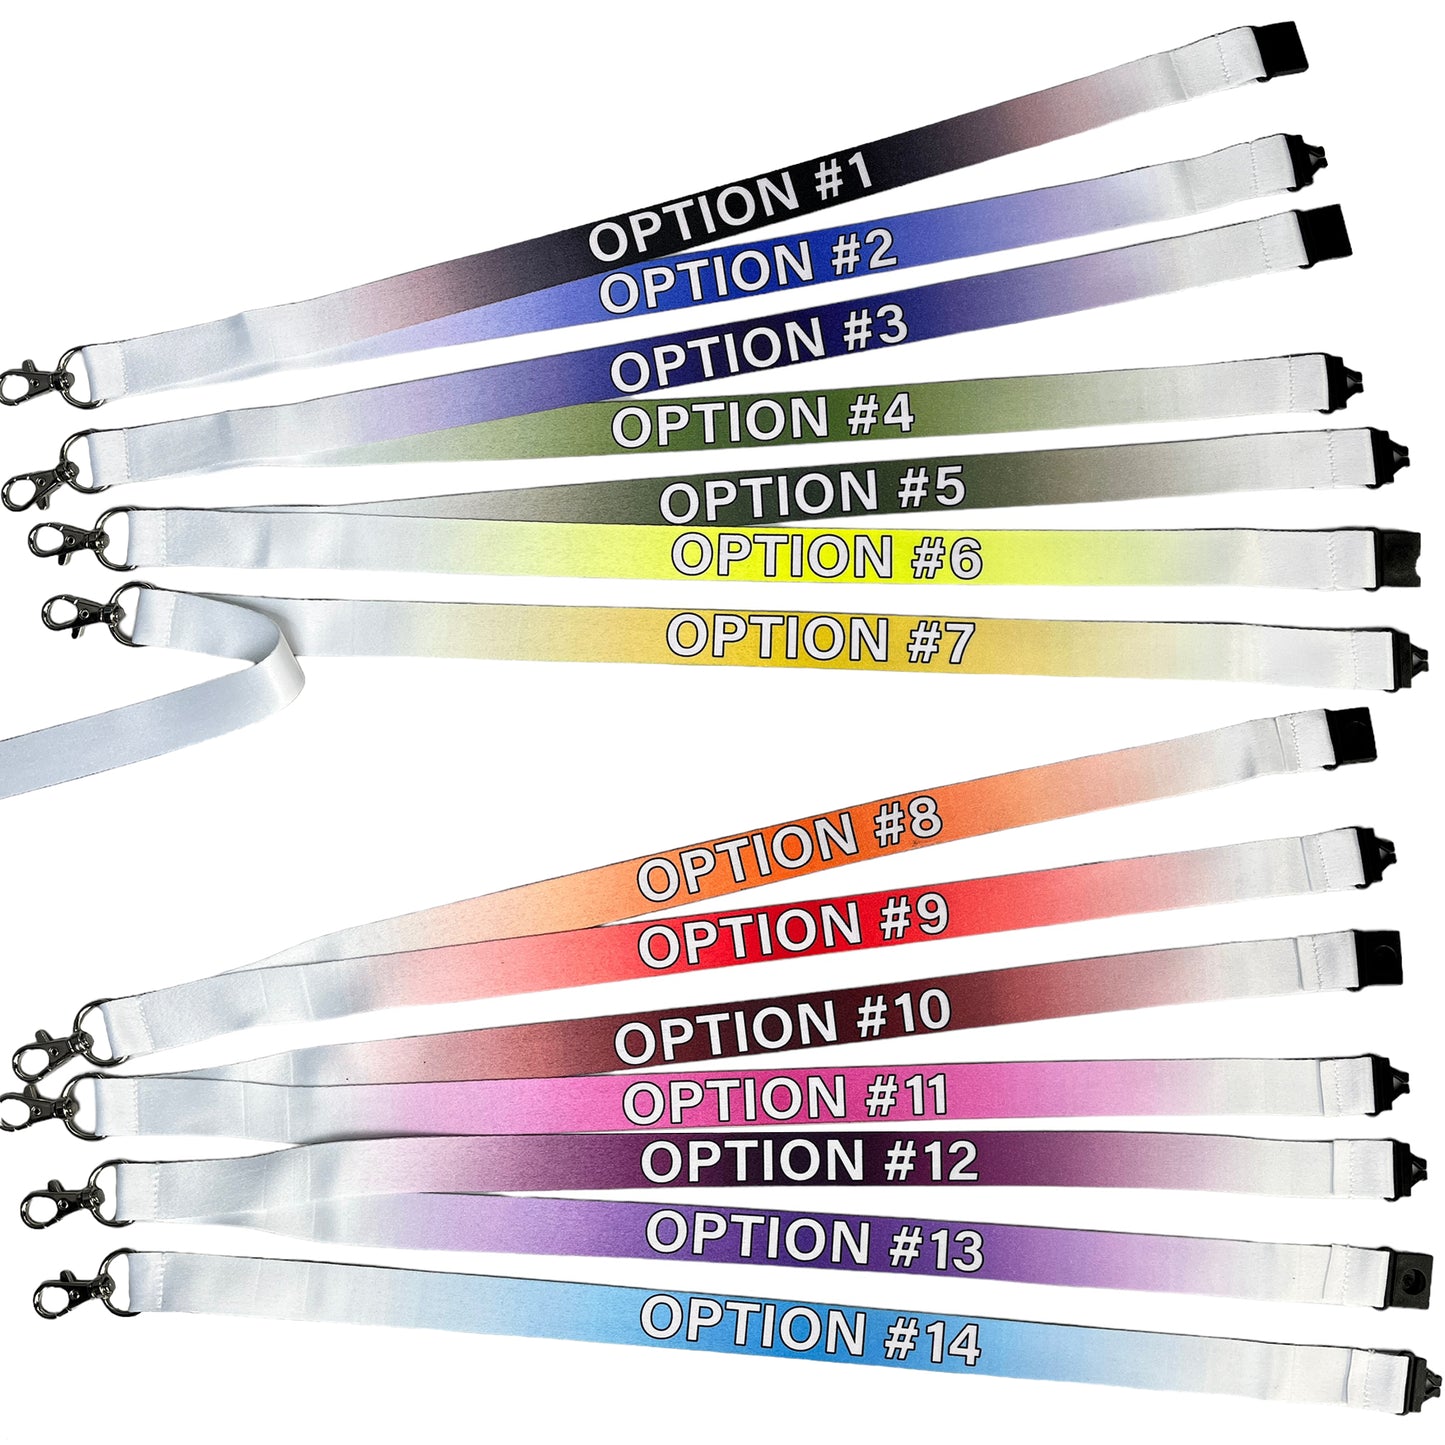 Business Logo or Text Promotional Lanyards - Personalized Lanyard - Bulk Discounts Available